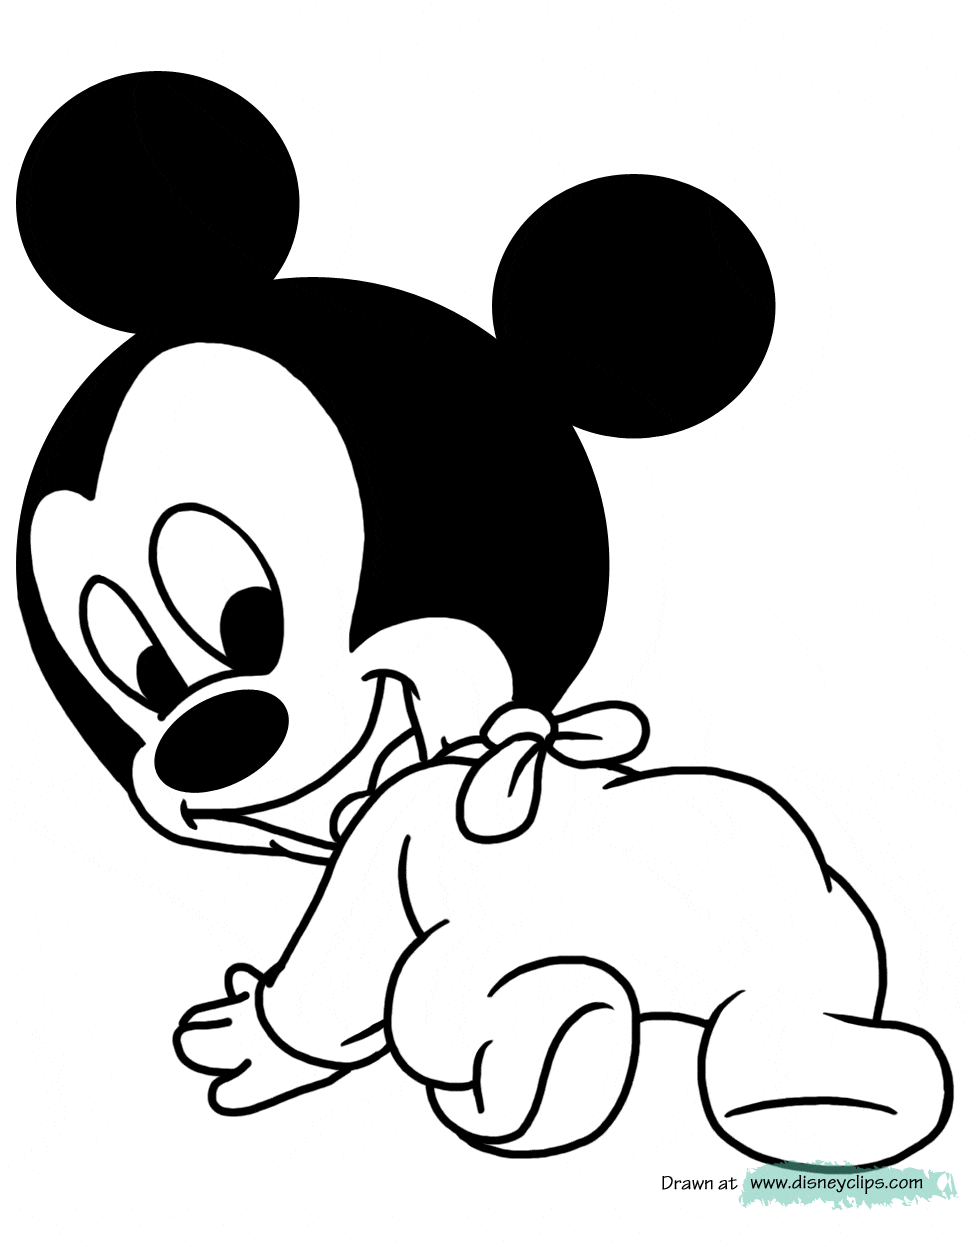 Disneybabies8 Gif 976 1 247 Pixels Baby Disney Characters Mickey Mouse Coloring Pages